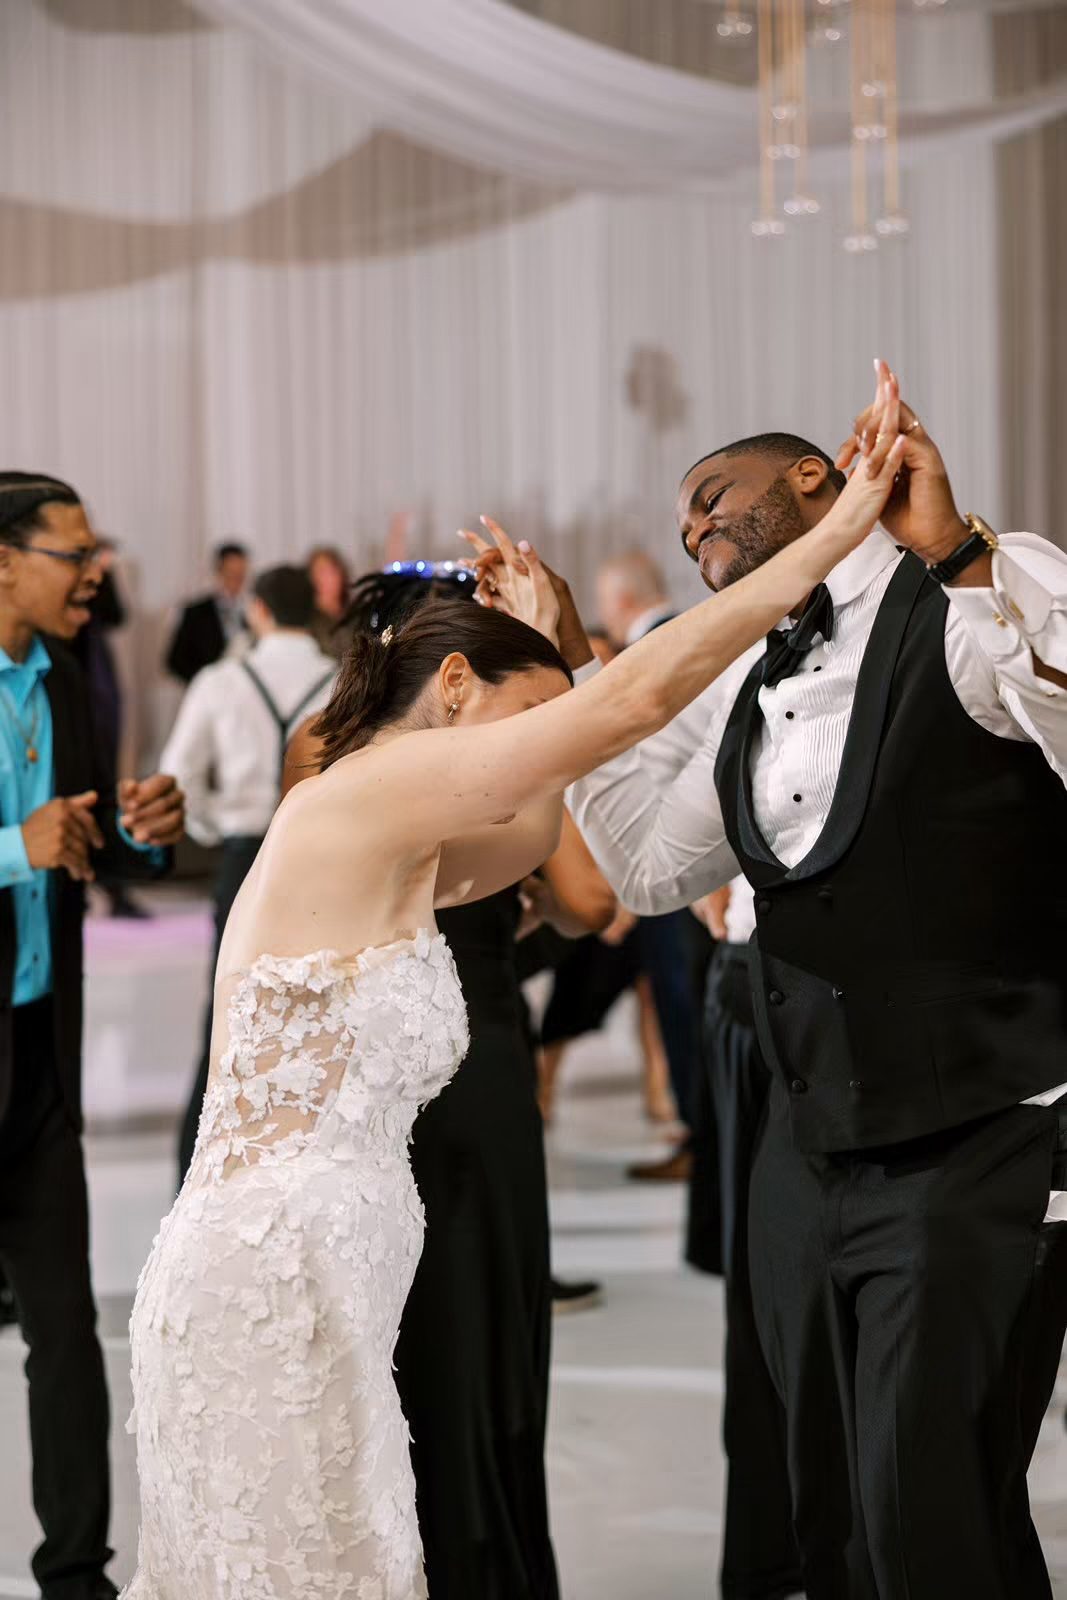 Bride and groom dance at their Peninsula Chicago wedding reception